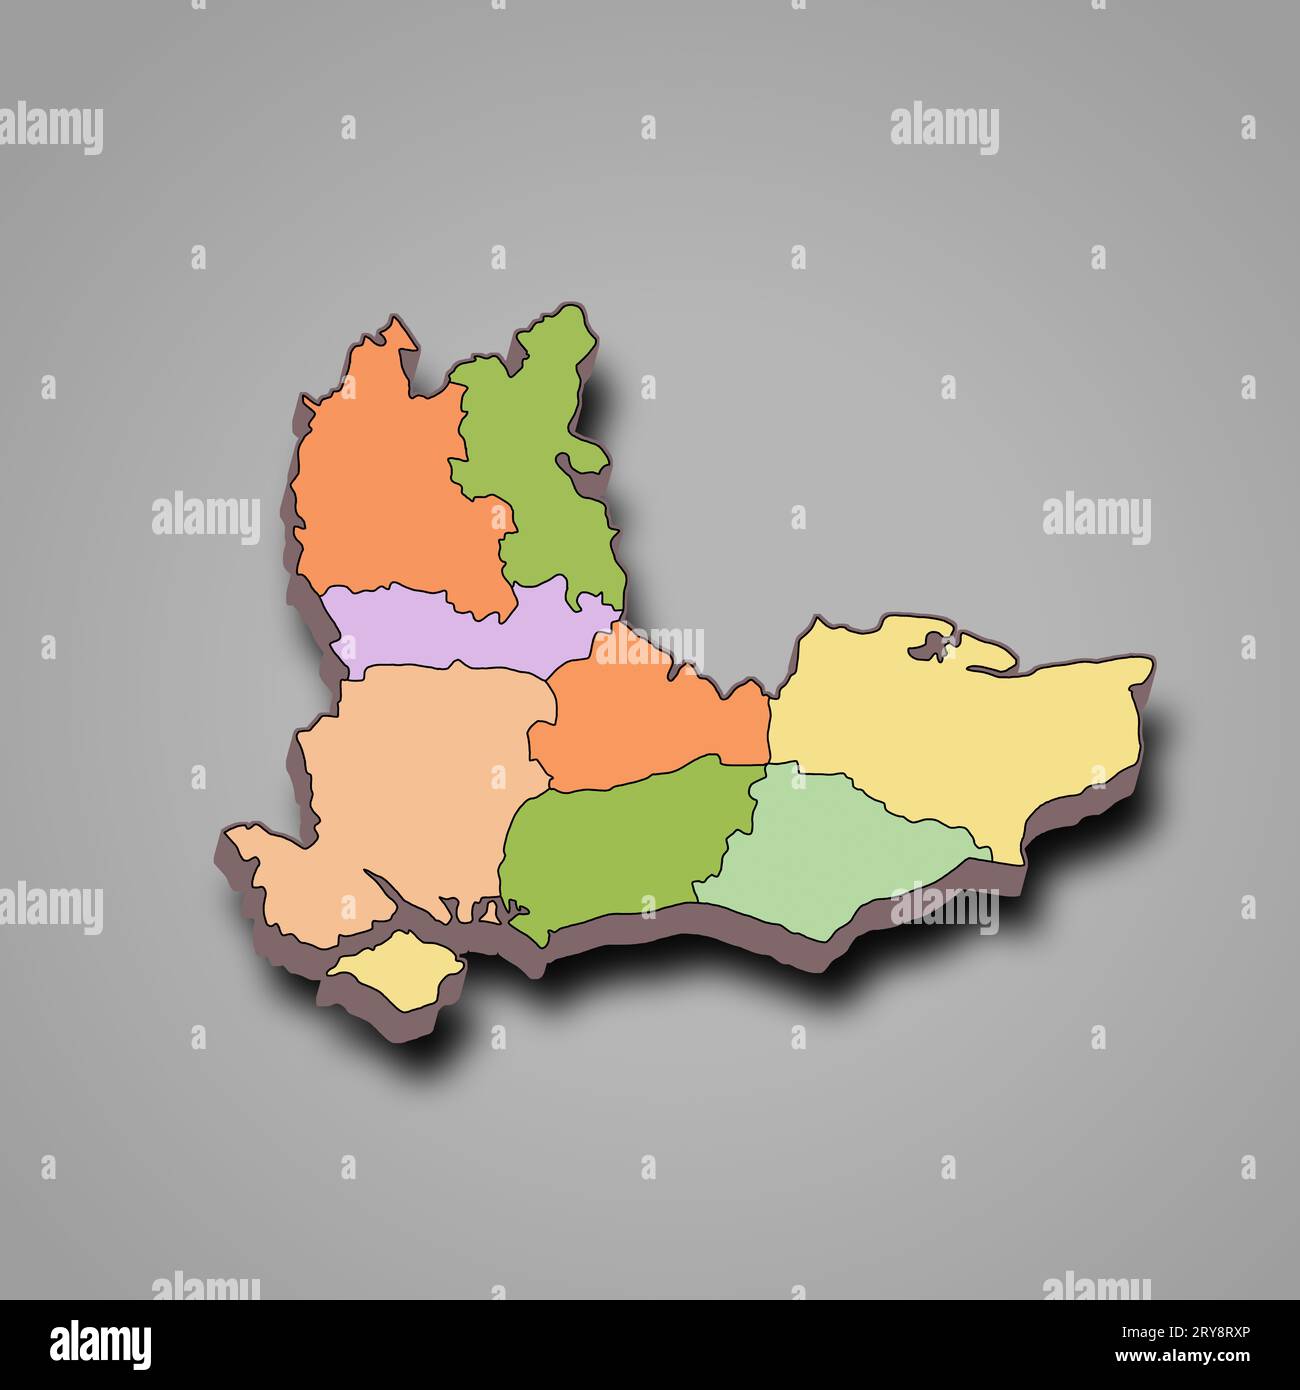 3d rendering High Quality outline map of South East England is a region of England, with borders of the ceremonial counties and different colour. Stock Photo